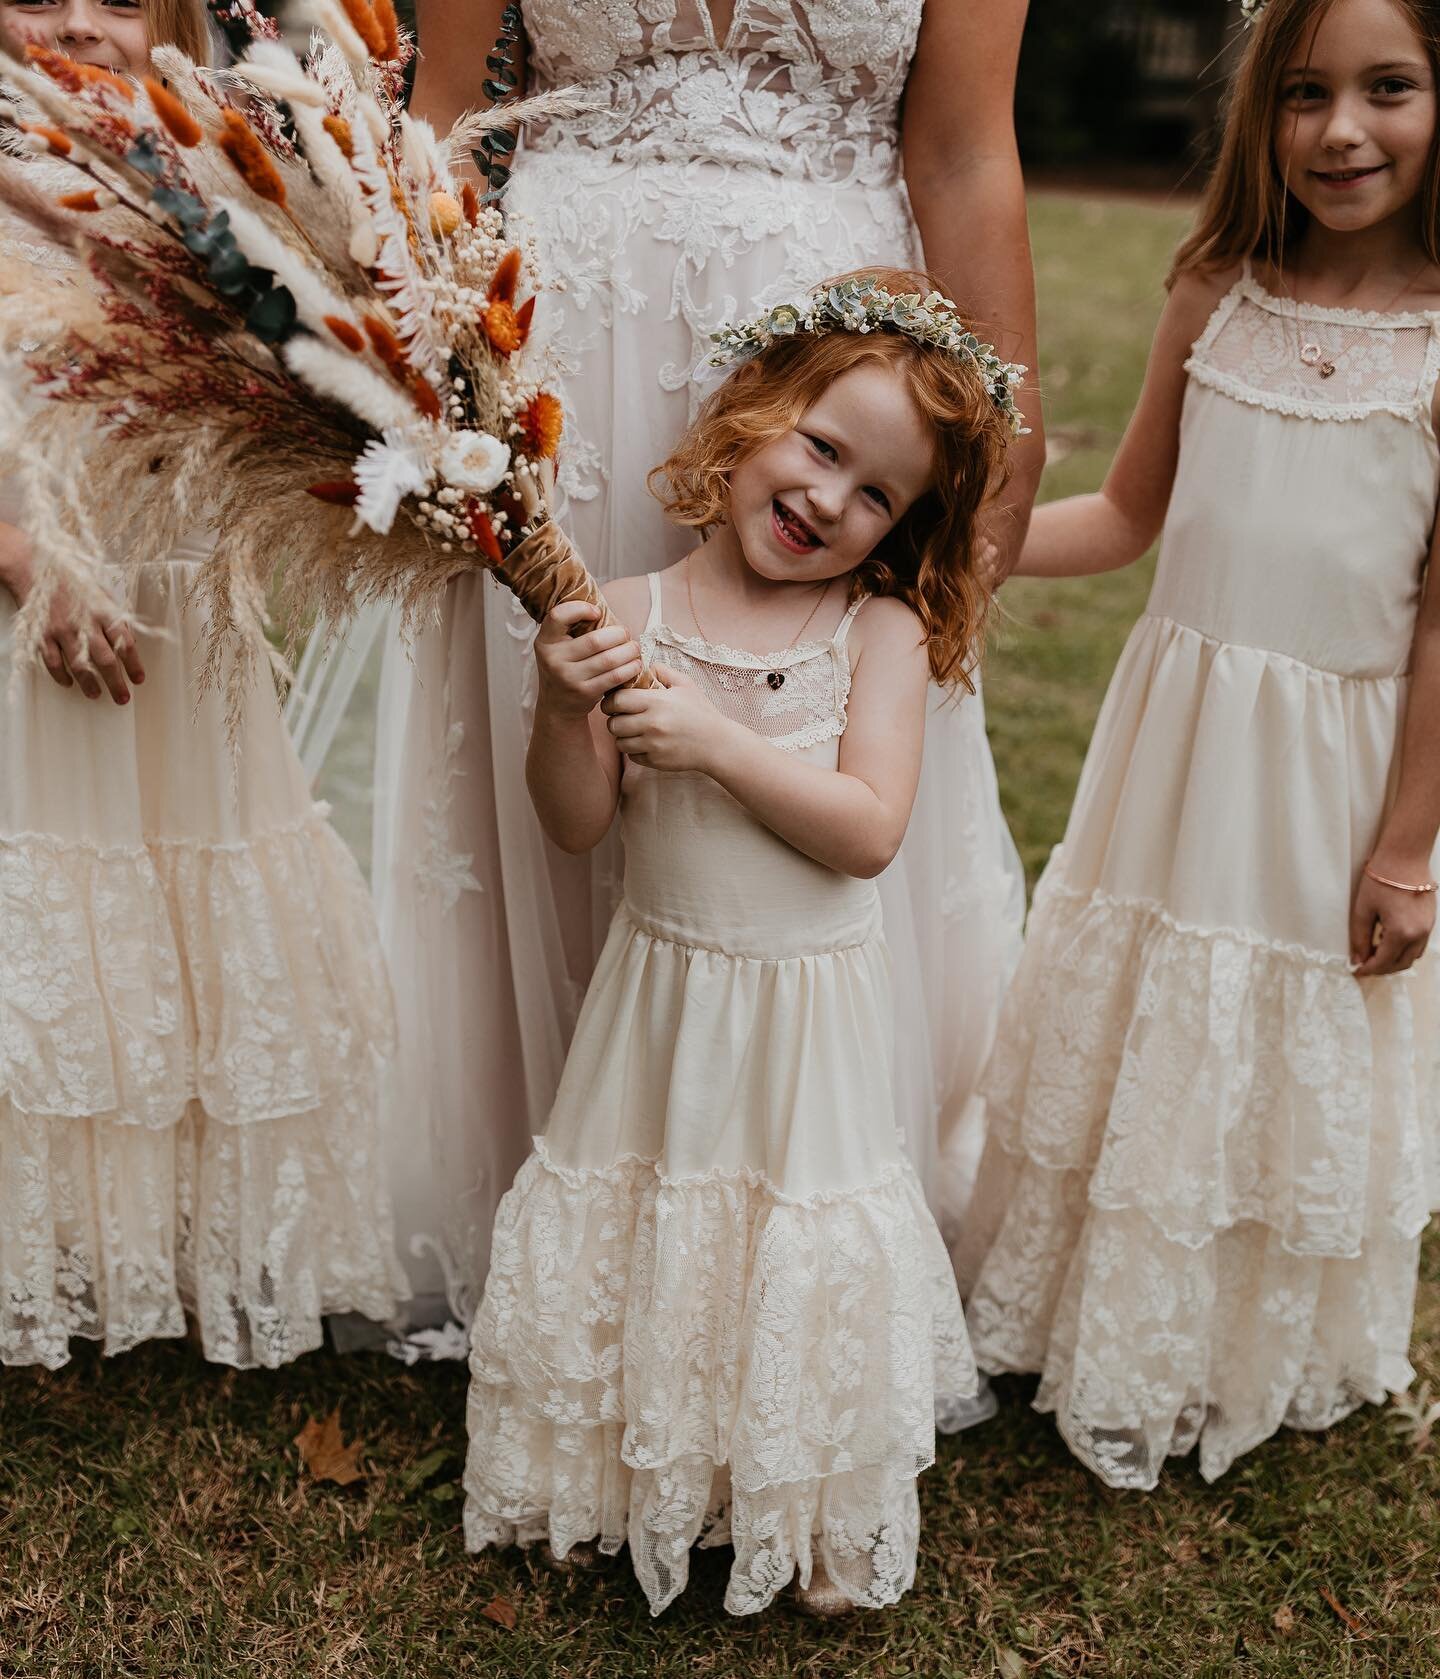 Even the smallest guests deserve larger than life memories!

Jeremy + Caitlyn | Oct. 1st, 2022

Schedule your event with us today! 
(803) 329-1020 | rentals@historicrockhill.com

📸: @mazzuccophotography 
📍: @thewhitehome.rockhill 
🕺🏻: @hospitalit